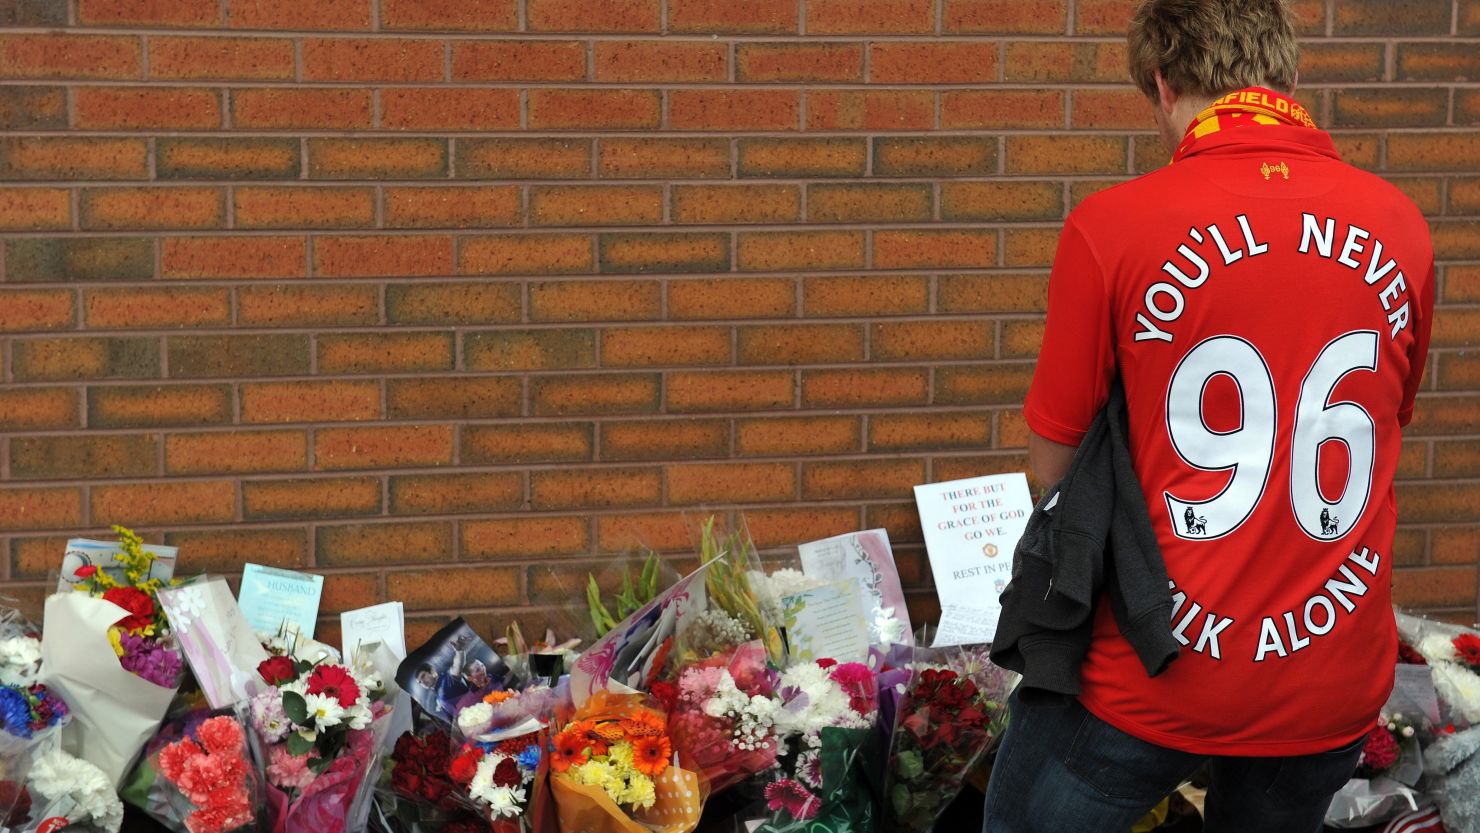 A Liverpool fan pays his respects outside the club's ground at Anfield, Liverpool on September 23, 2012.